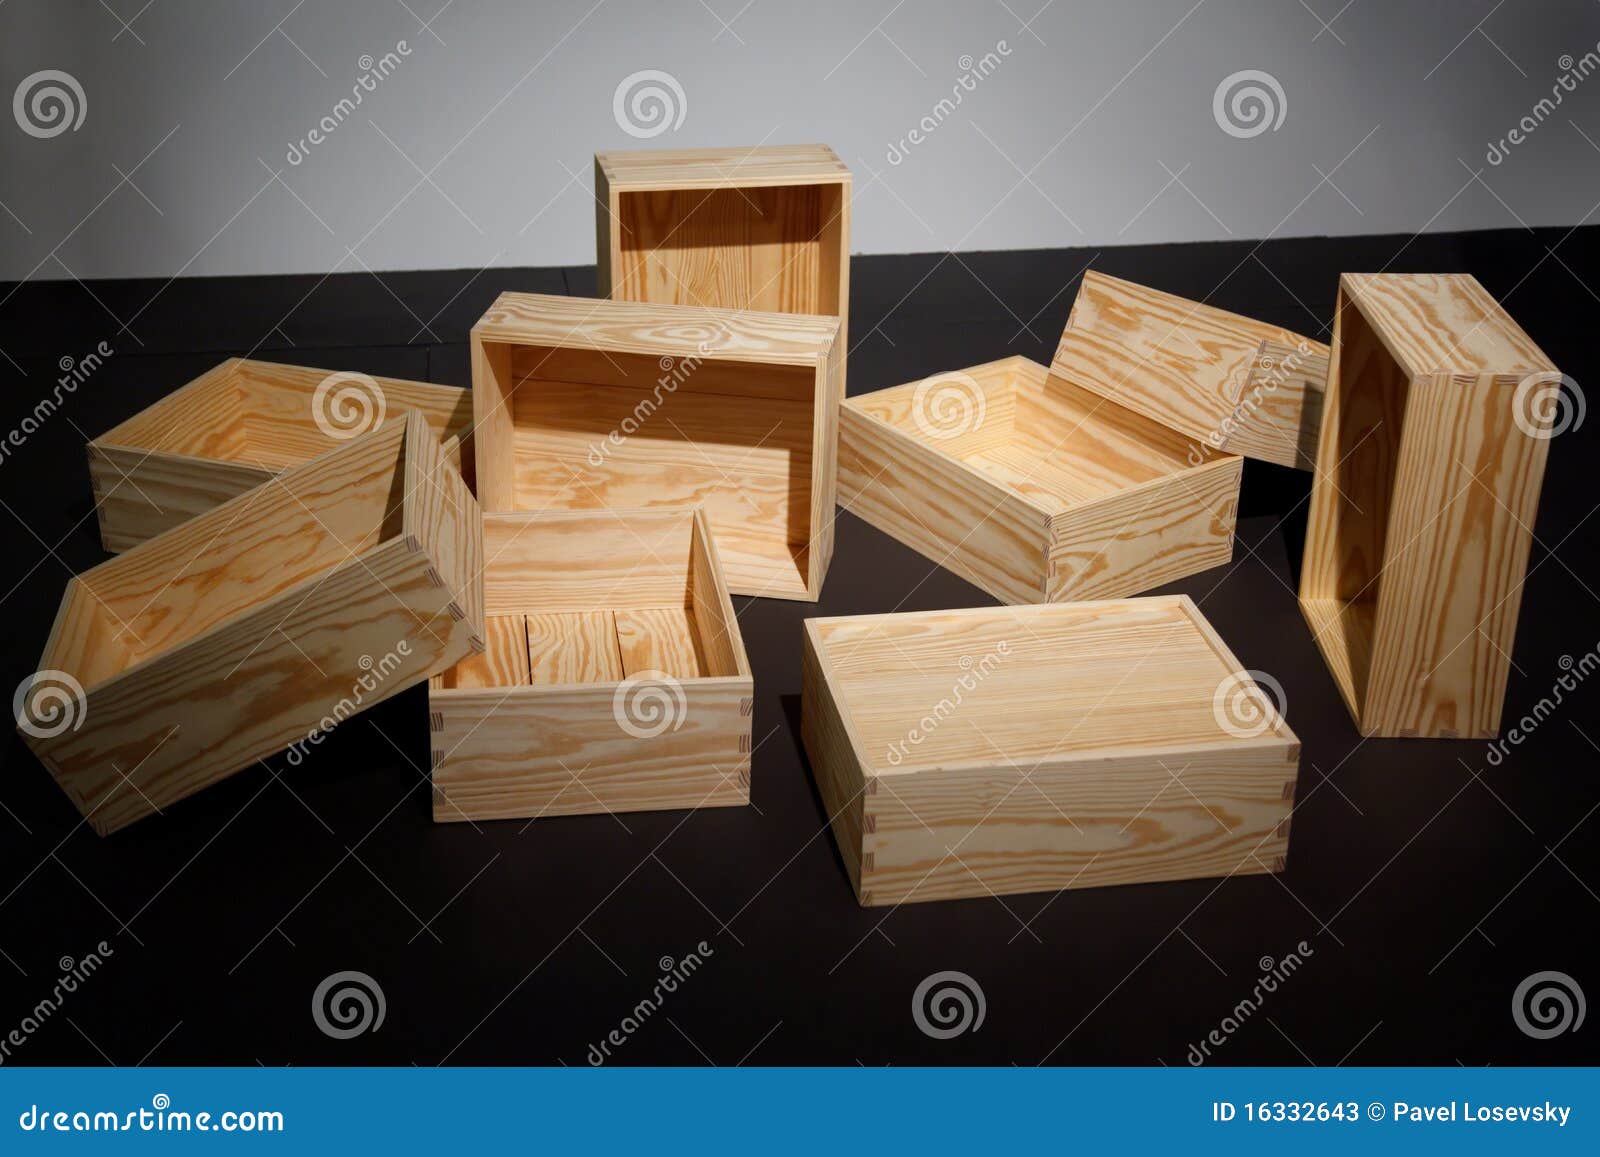 scattered empty wooden boxes on floor.